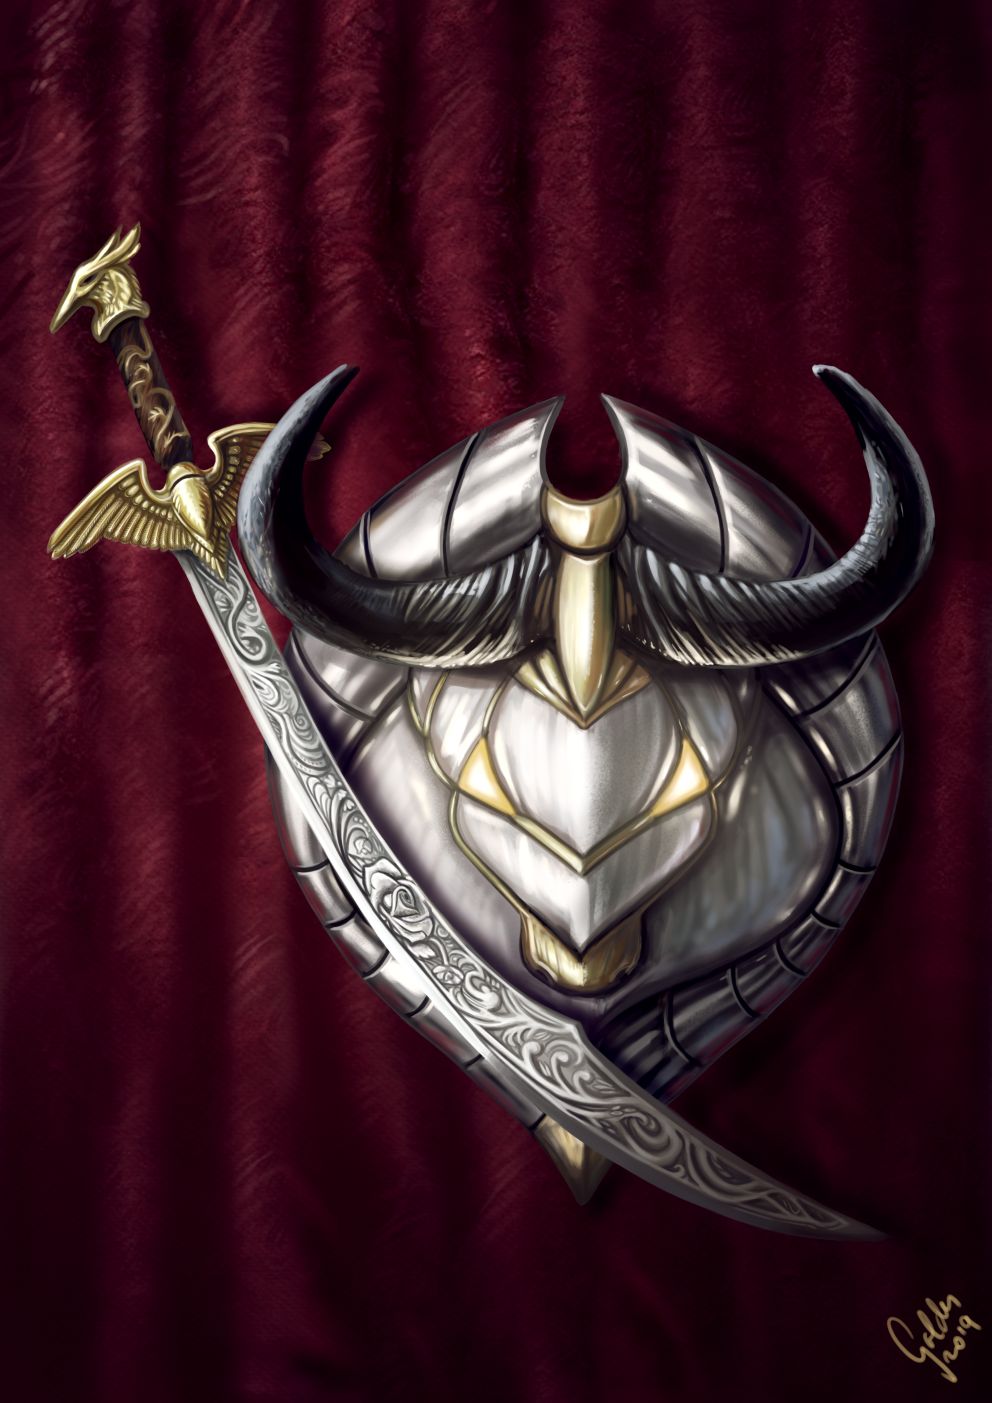 Sword and Shield of the Rose by Galder on DeviantArt